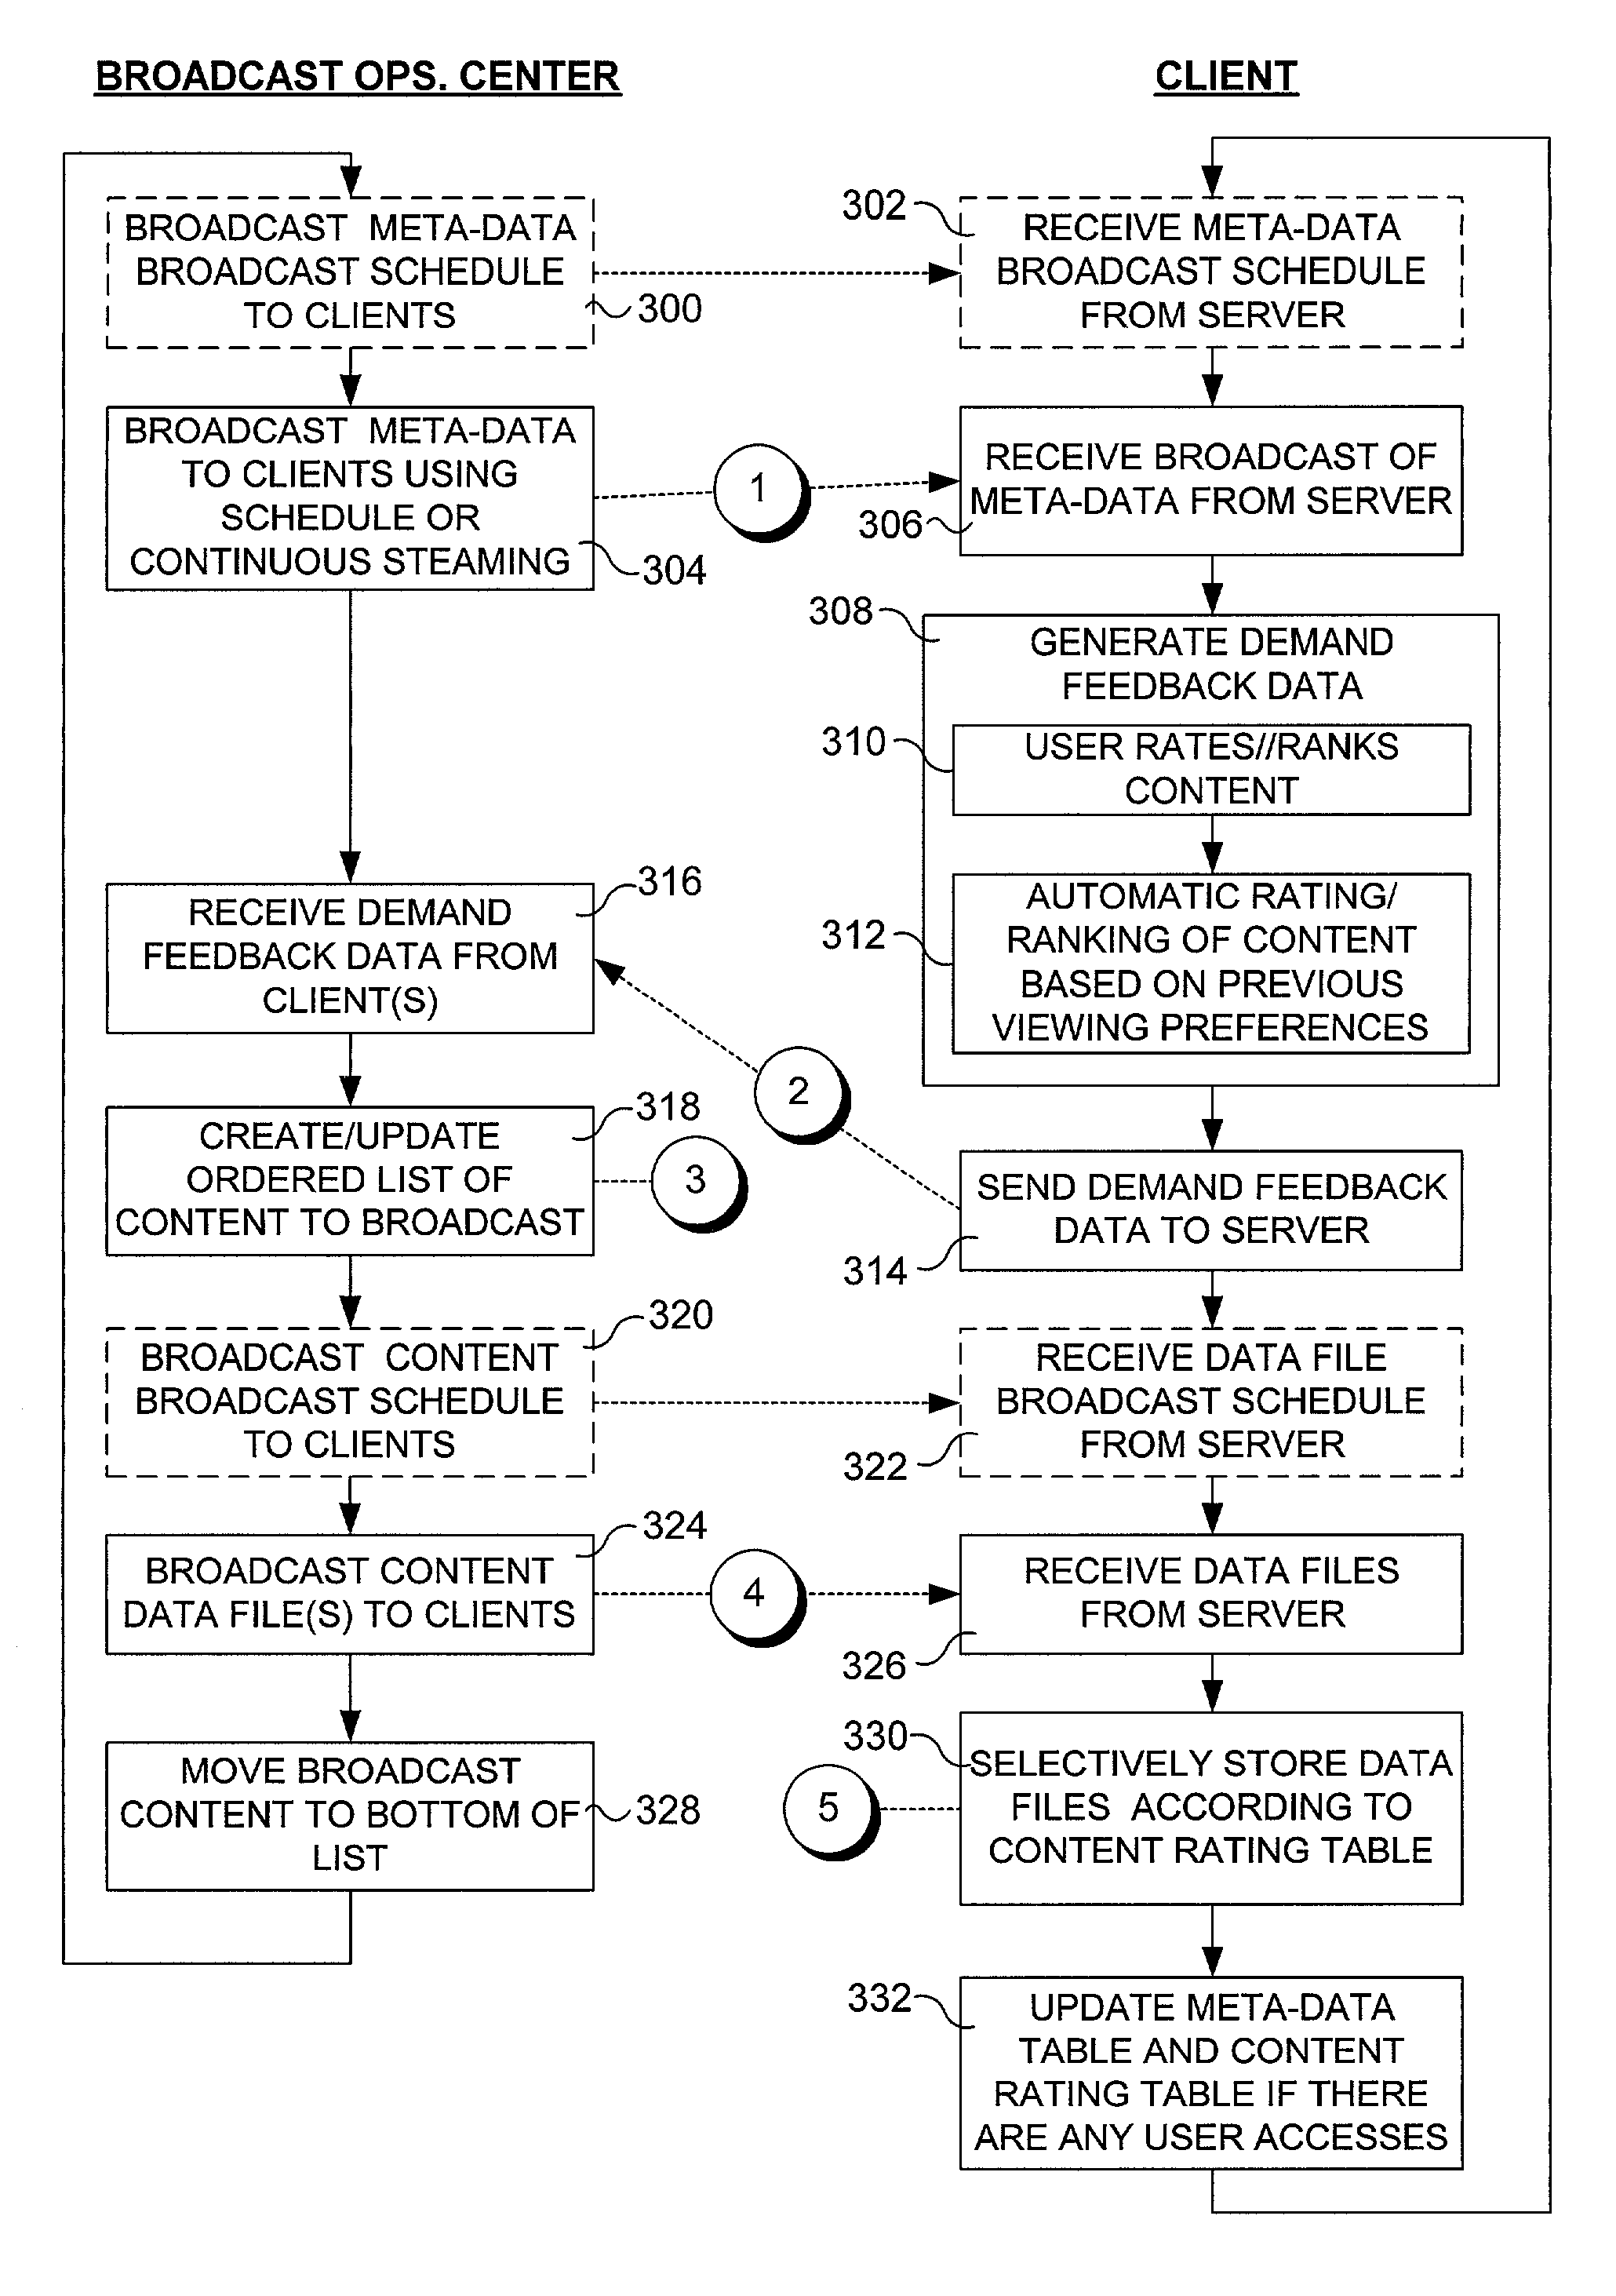 Method and apparatus for continuously and opportunistically driving an optimal broadcast schedule based on most recent client demand feedback from a distributed set of broadcast clients